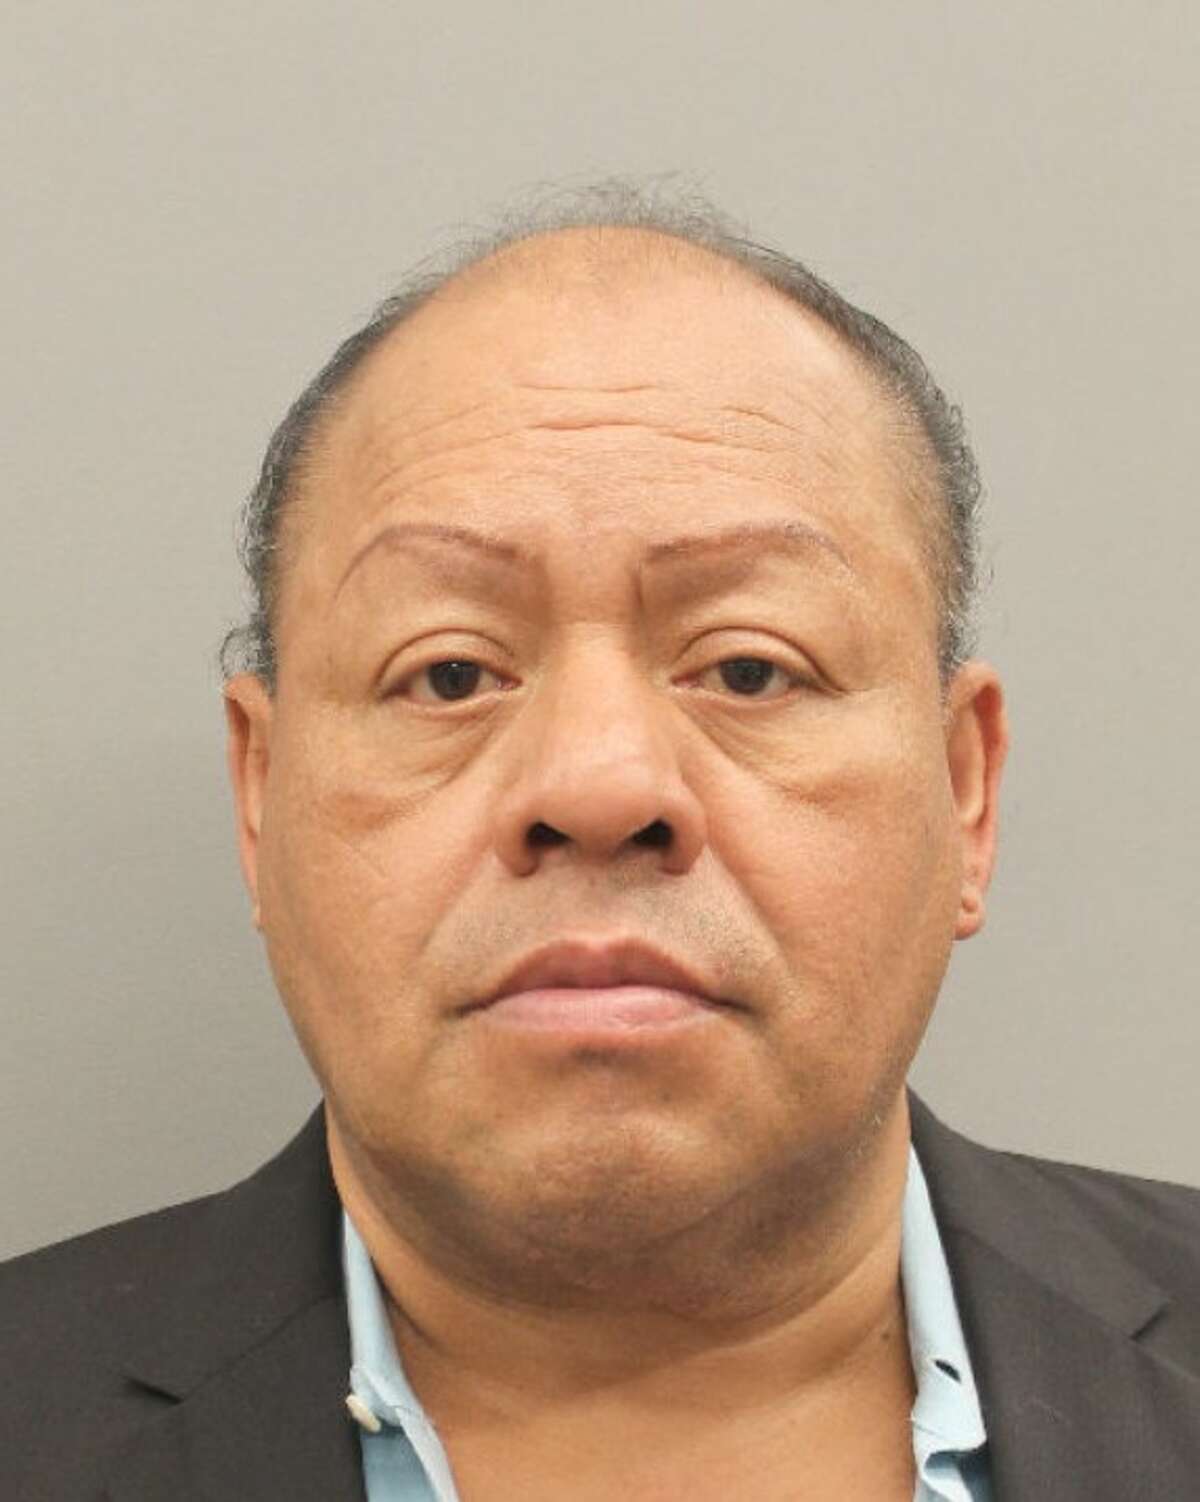 Mario Alverto Navarro, 52, of Greenspoint was convicted on Wednesday of aggravated sexual assault of a child under the age of 14 and sentenced to 22 years in prison, according to the Harris County District Attorney's Office.